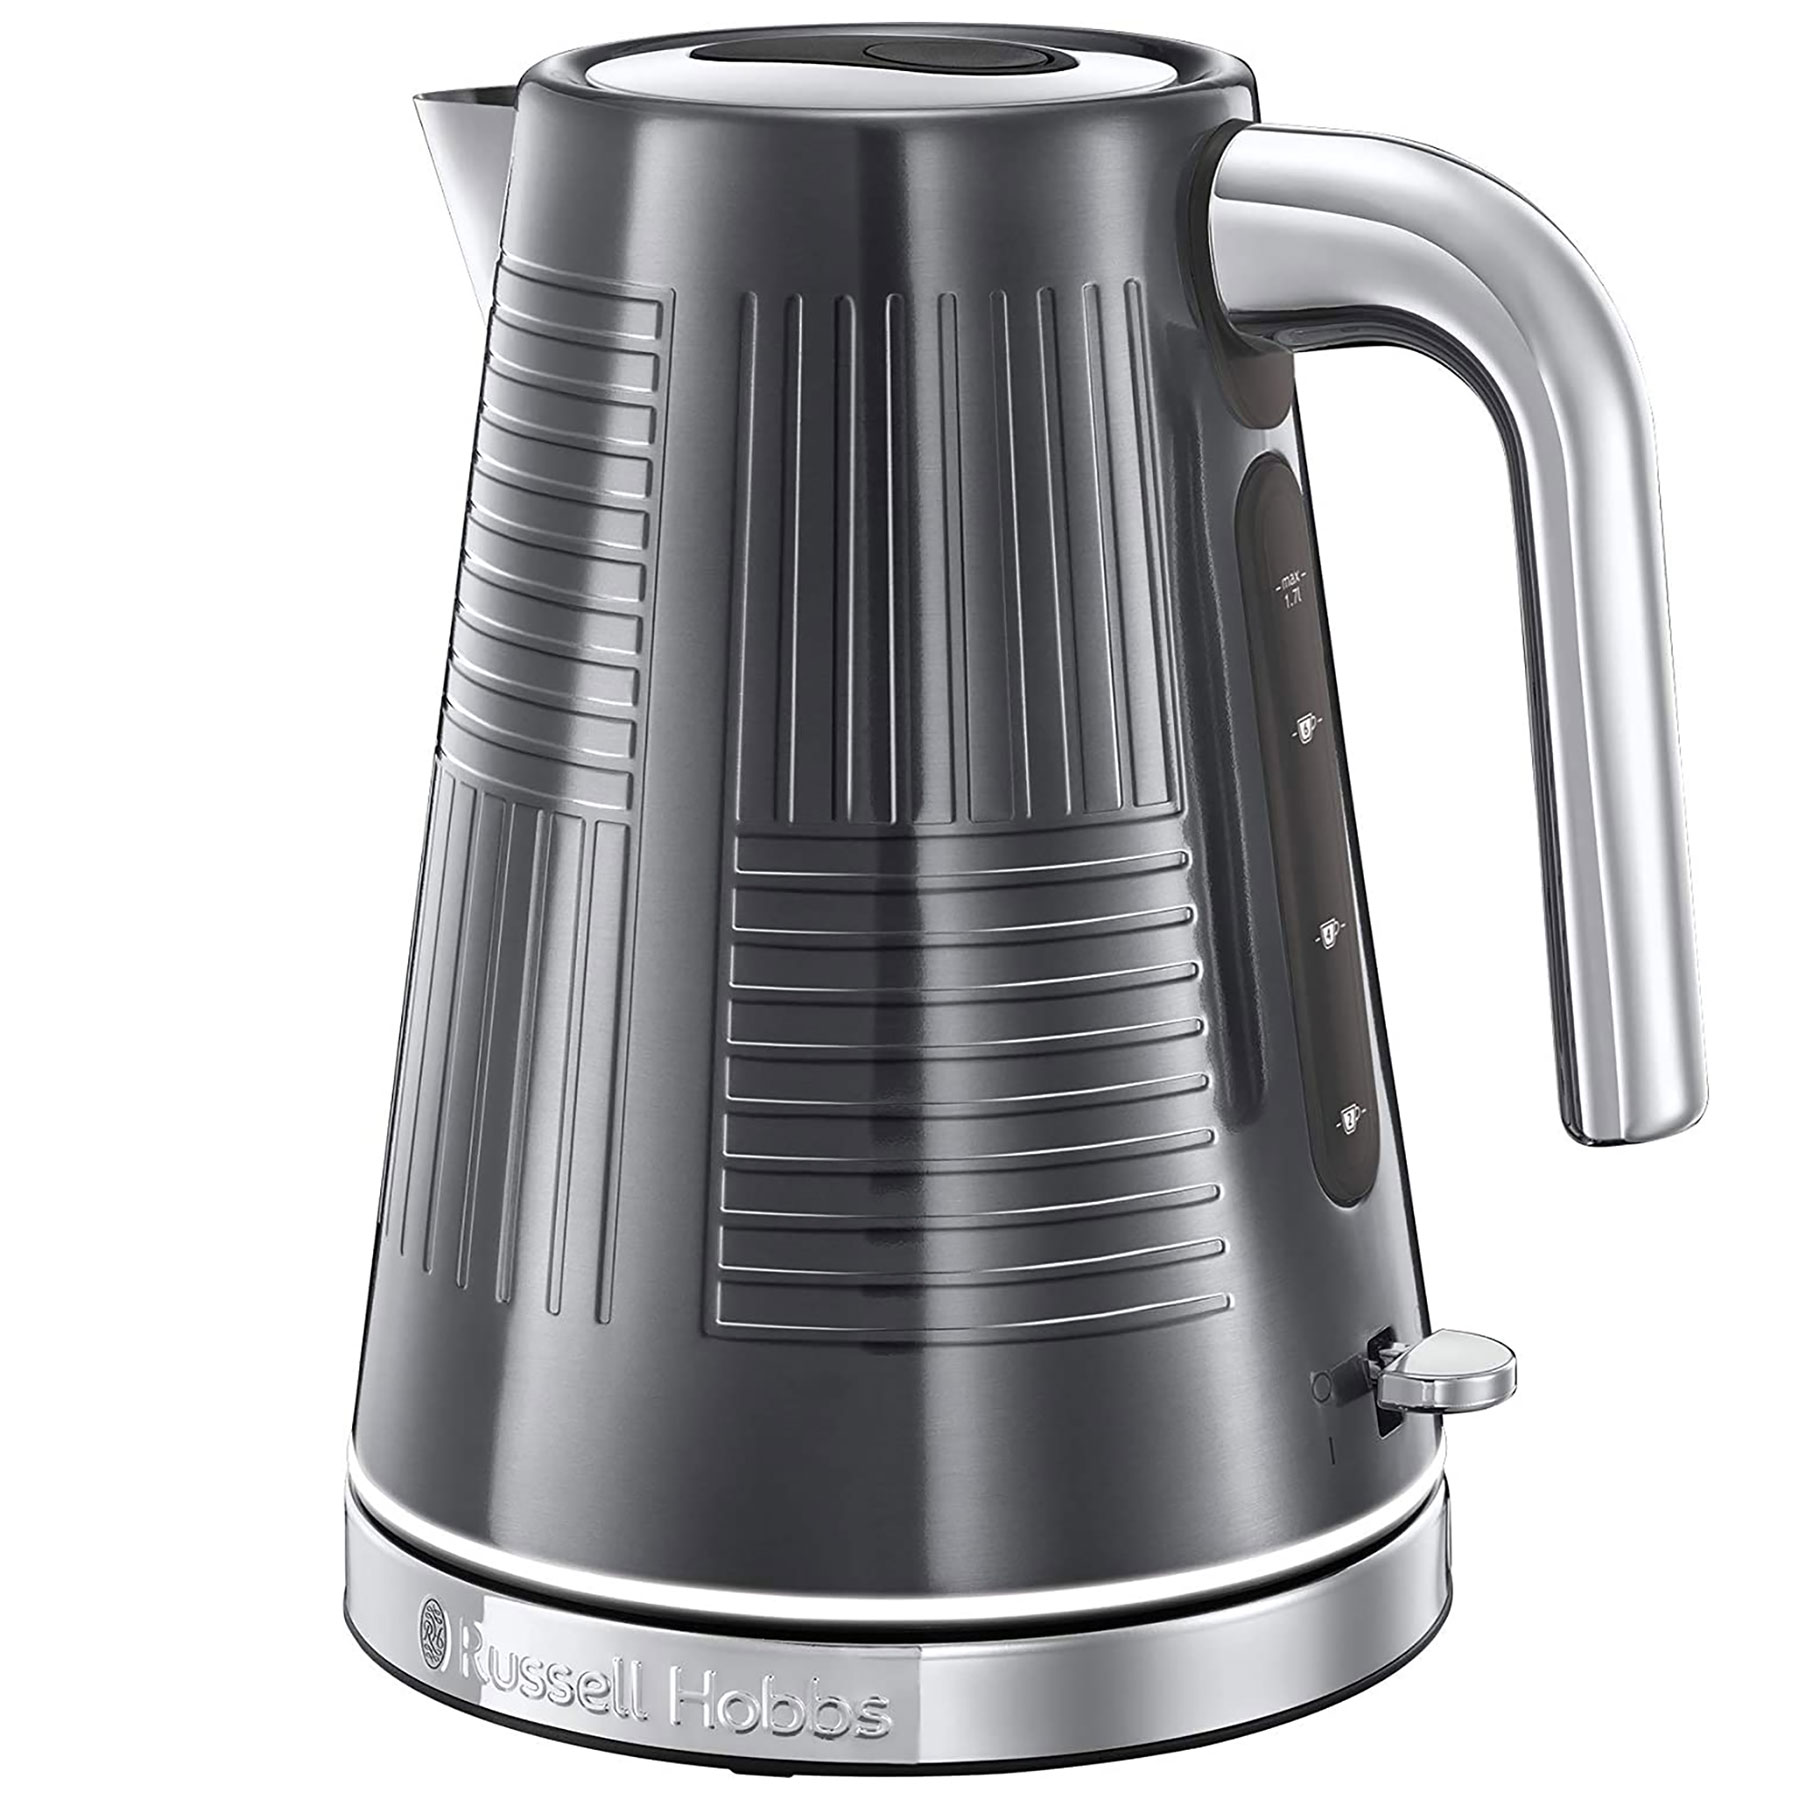 Image of Russell Hobbs 25240 Geo Cordless Electric Kettle Grey 1 7L 3kW